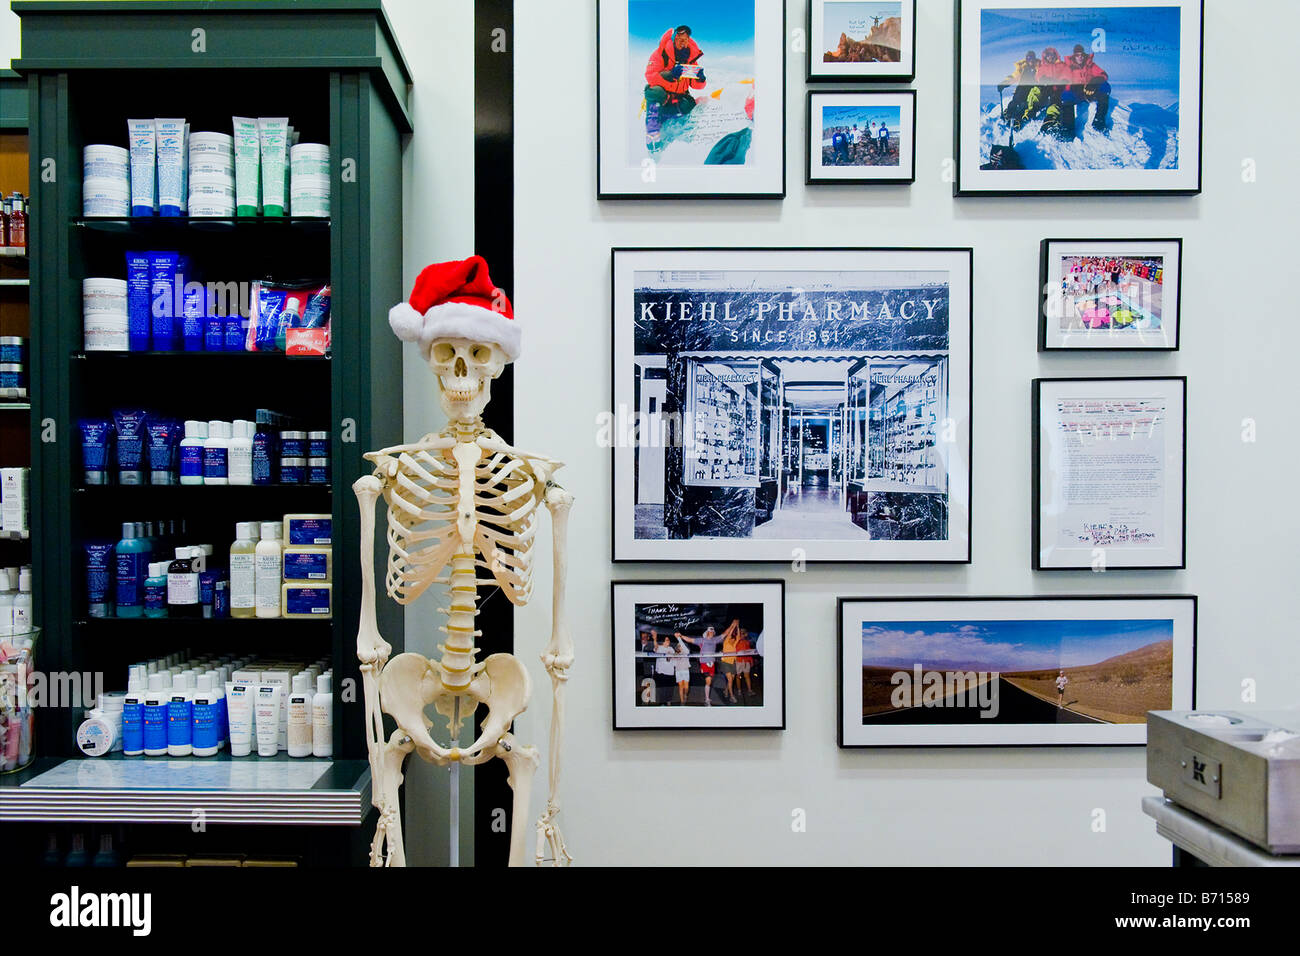 Florida West Palm Beach Gardens Shopping Mall center Xmas decoration at Kiehl Pharmacy skeleton with Father Christmas hat in department store Stock Photo